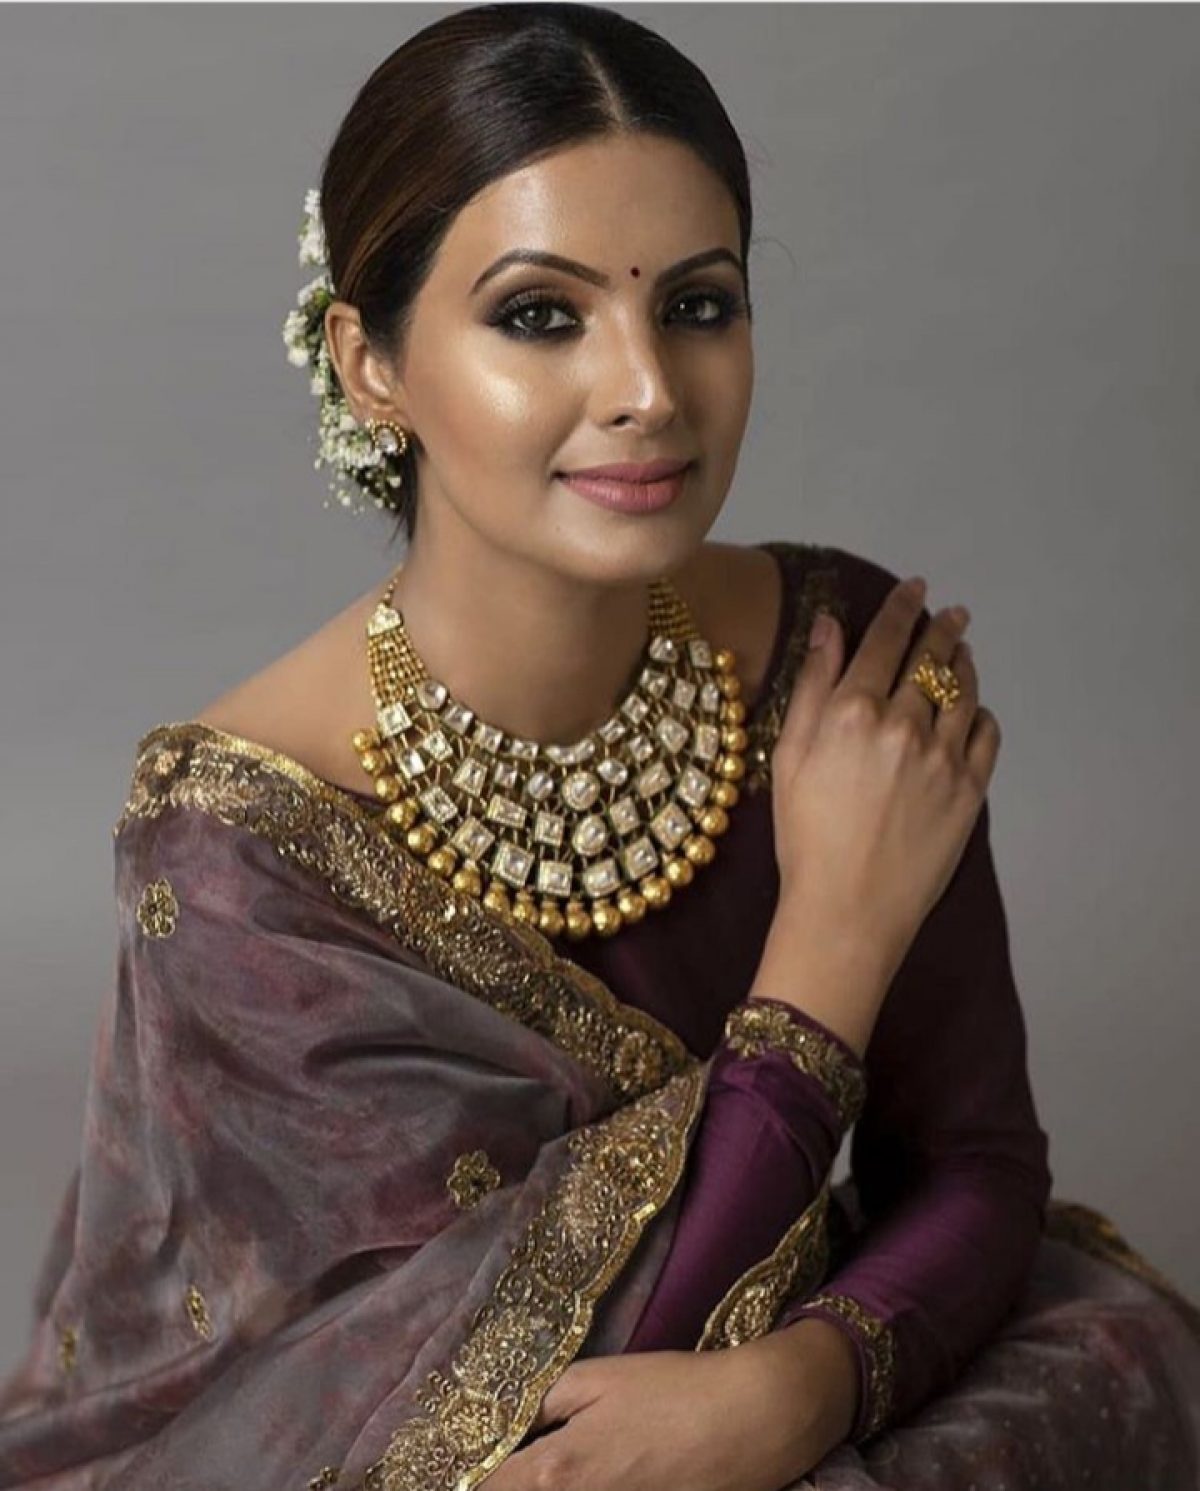 Geeta Basra S Biography Harbhajan Singh Wife Age Film Career Photos Above all information that we provided was based on many other sources. biography harbhajan singh wife age